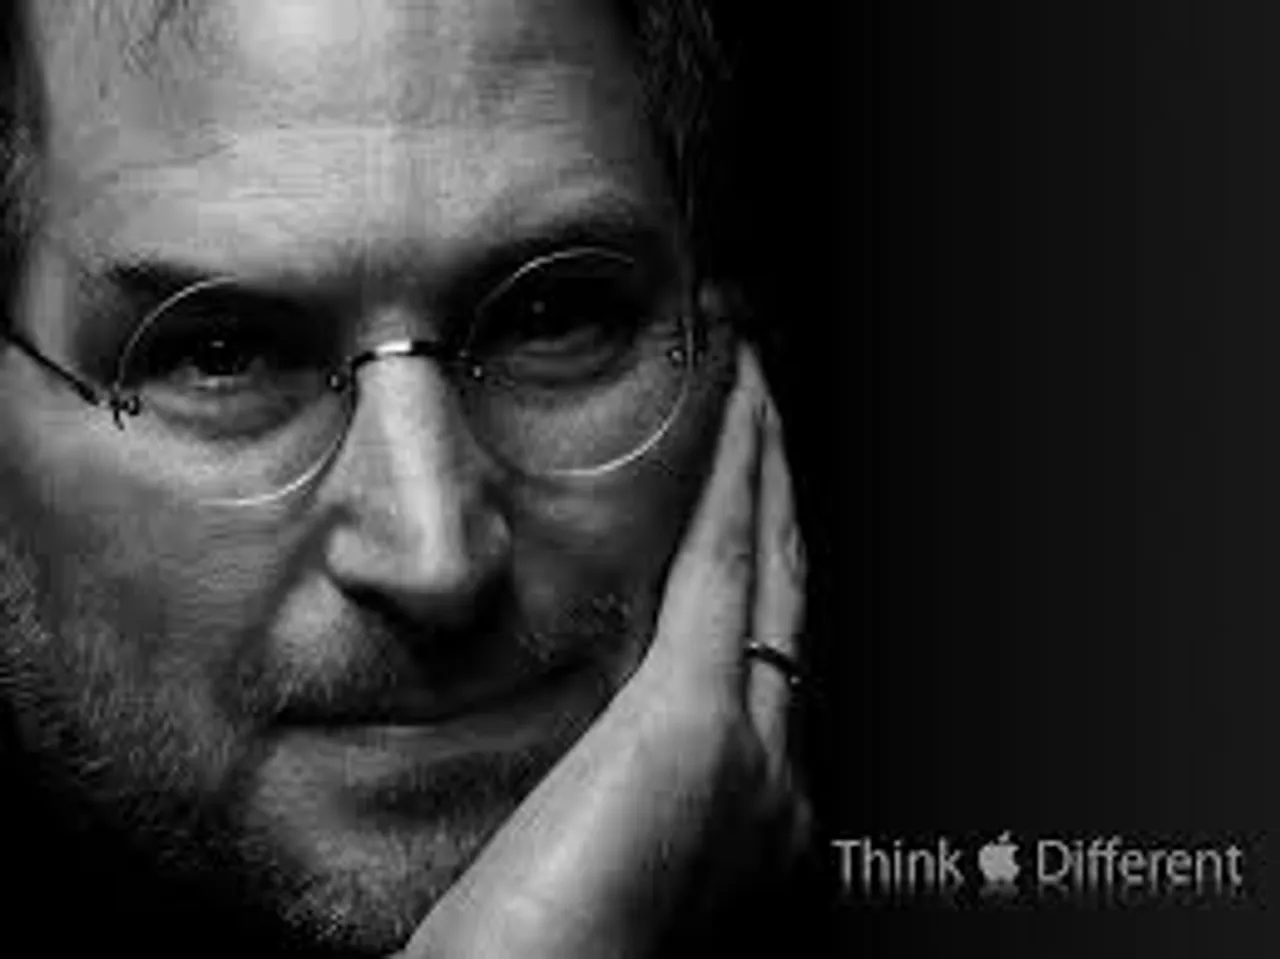 Inspirational quotes from Steve Jobs that will change your outlook towards life